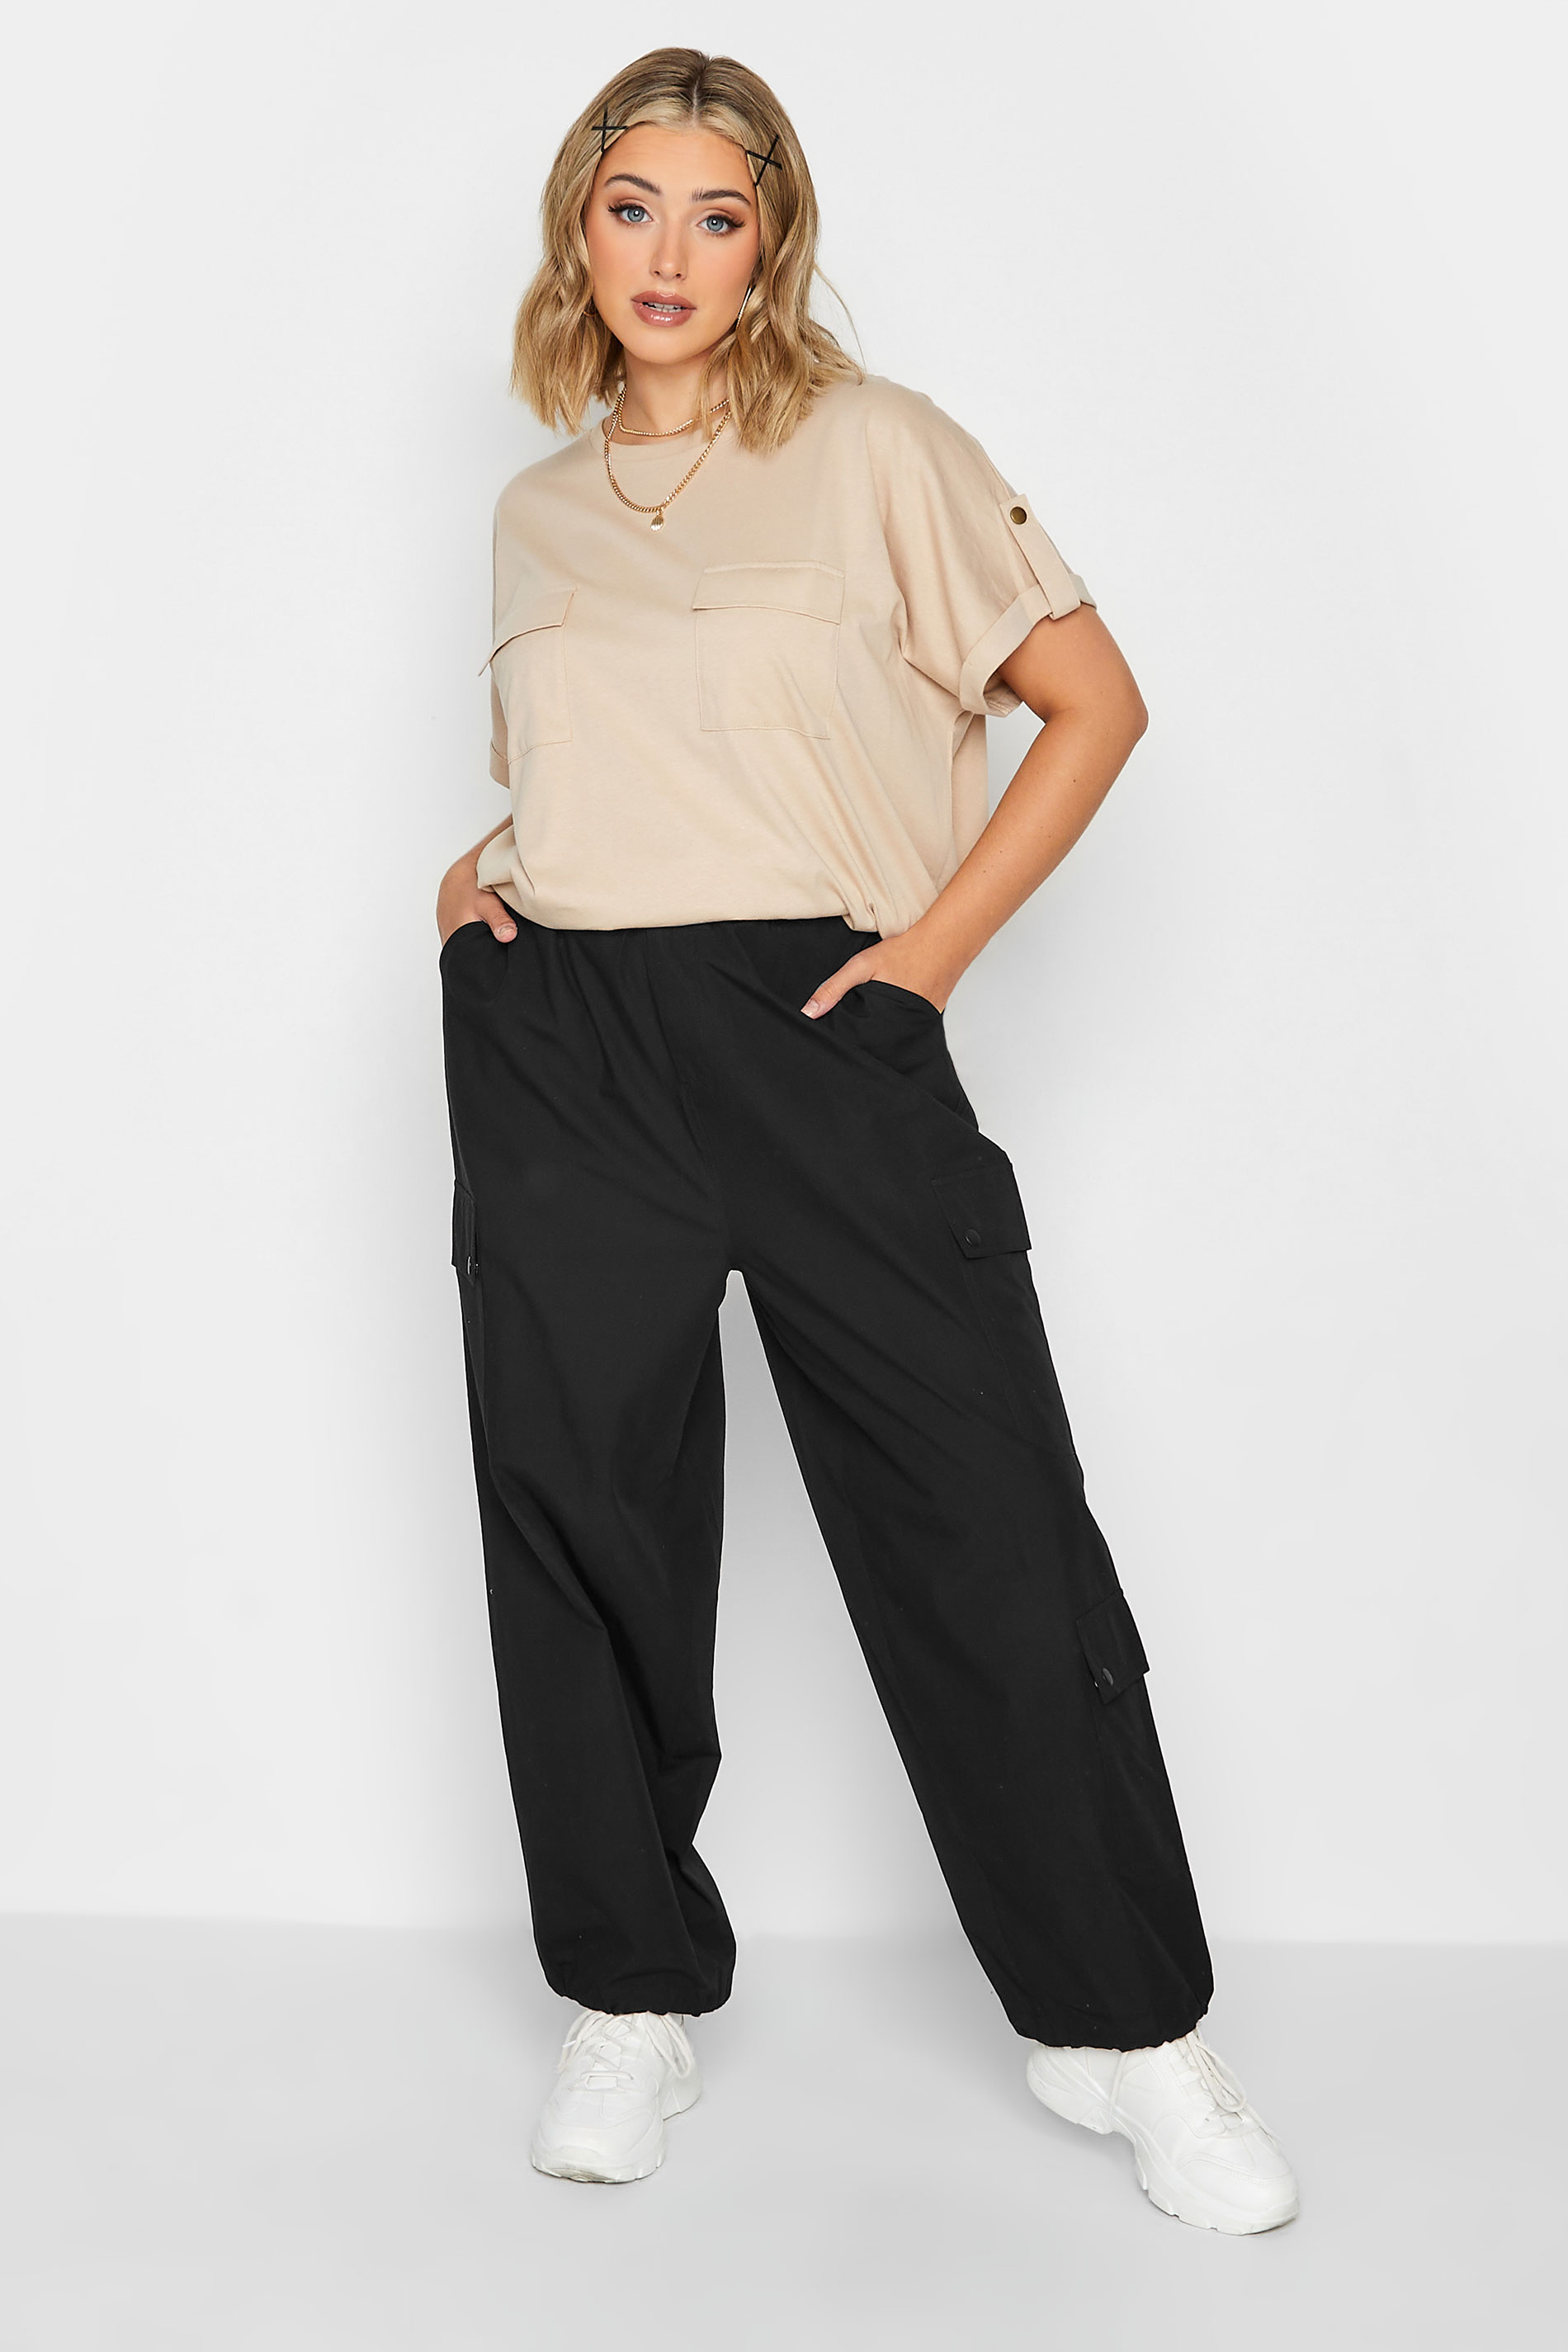 LIMITED COLLECTION Plus Size Black Cargo Trousers | Yours Clothing 2